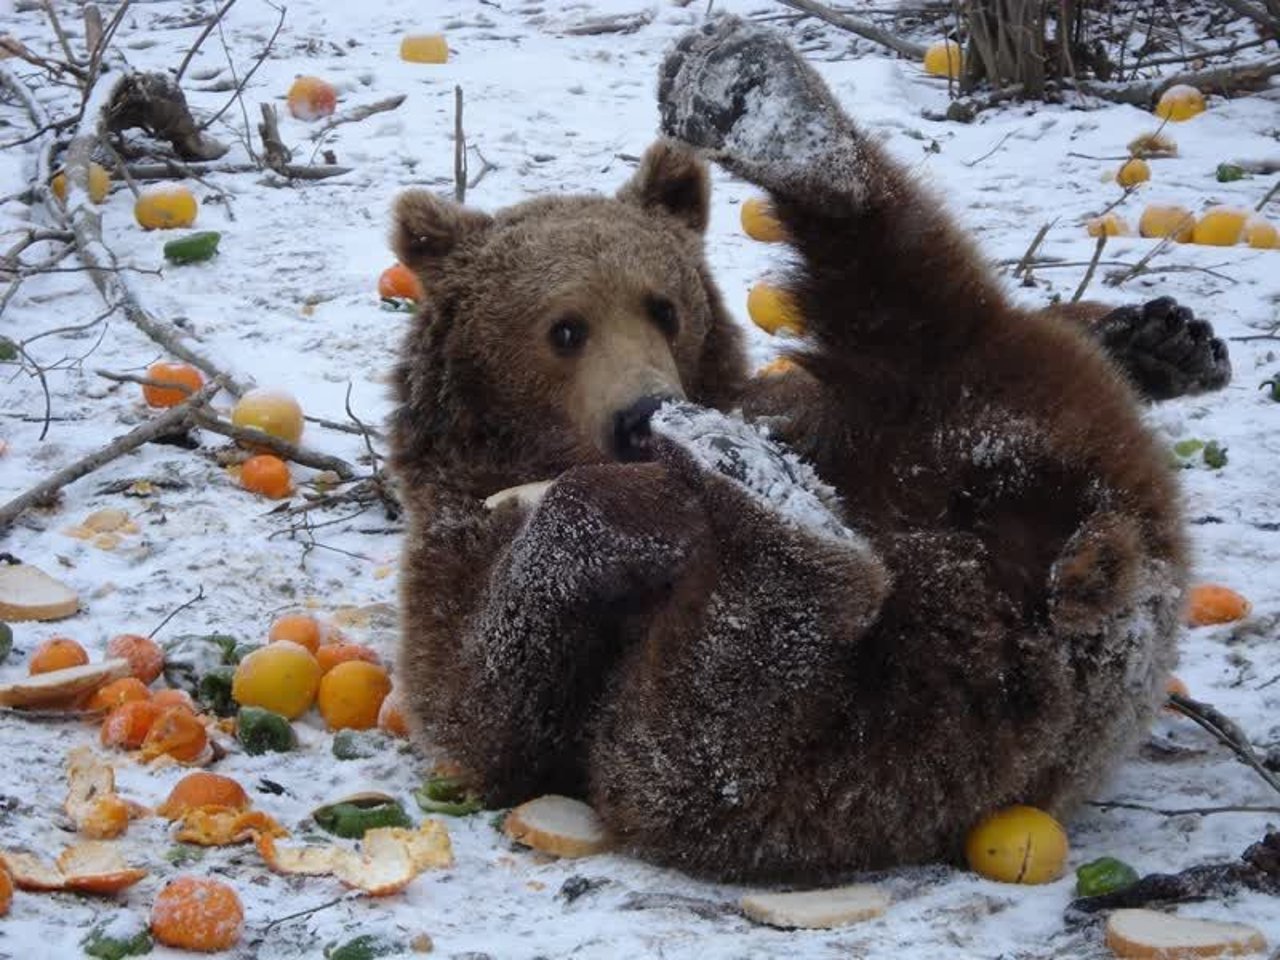  Gina, one of the residents of the Romania Bear Sanctuary, enjoys a snack while playing in the snow